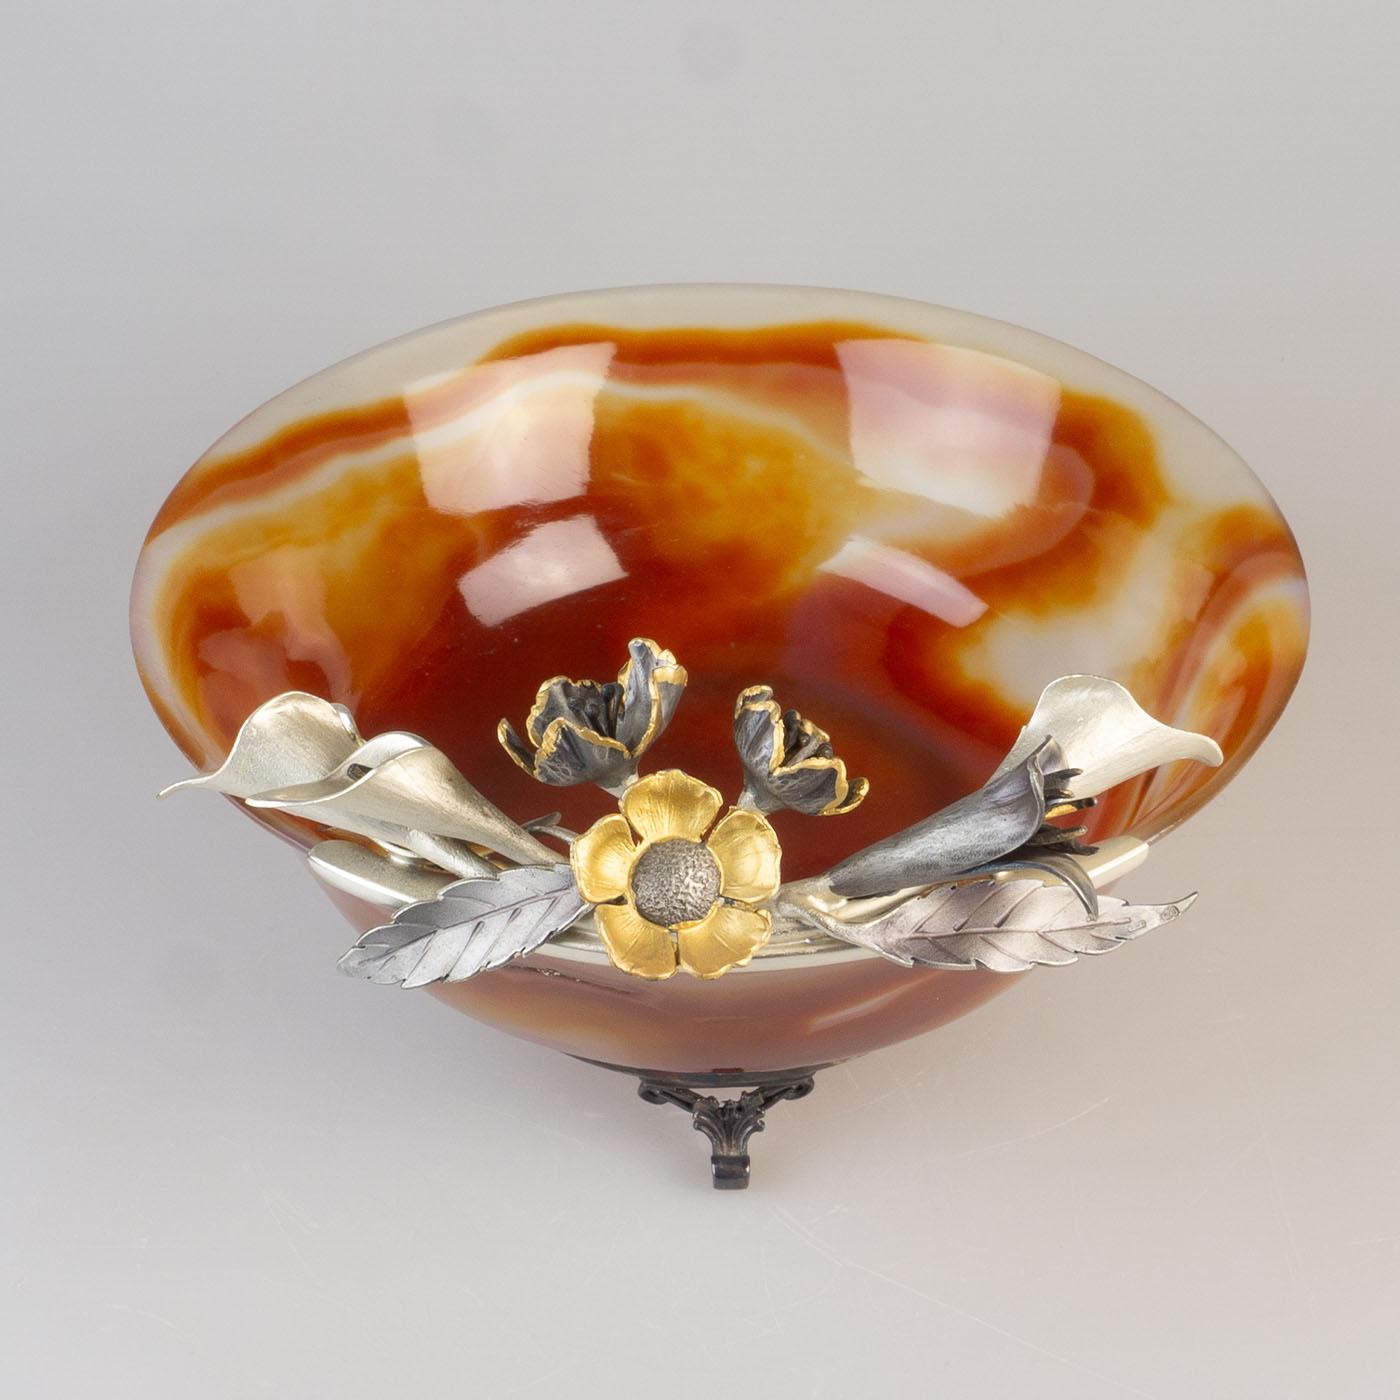 Stone Carnelian Agate and Antique Silver Vide Poches For Sale